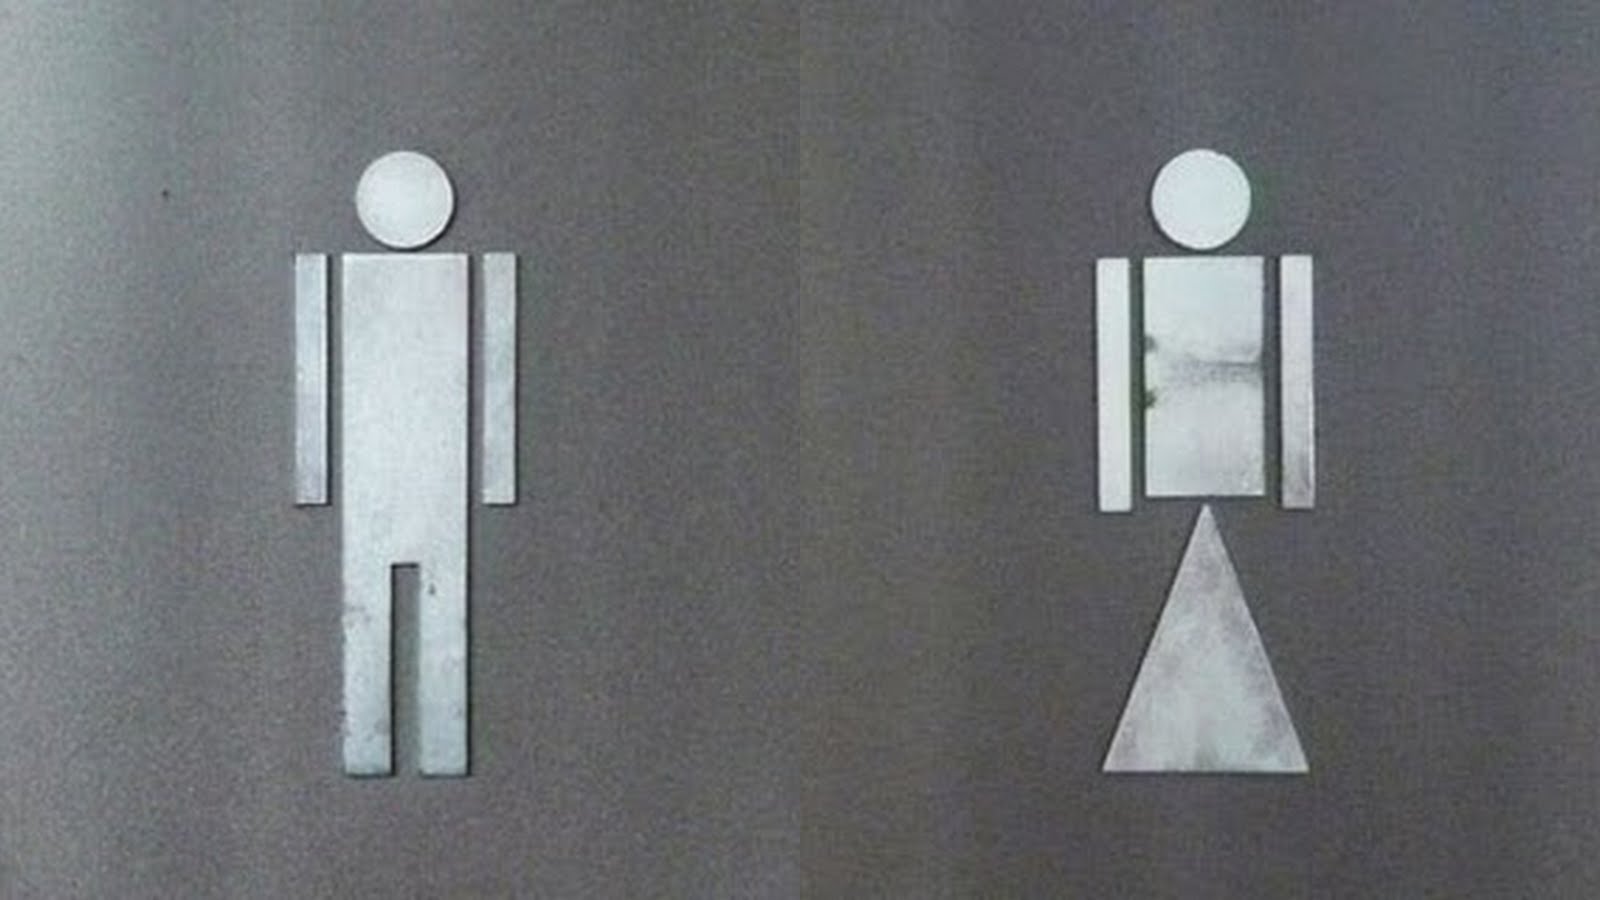 Go Where? Sex, Gender, and Toilets